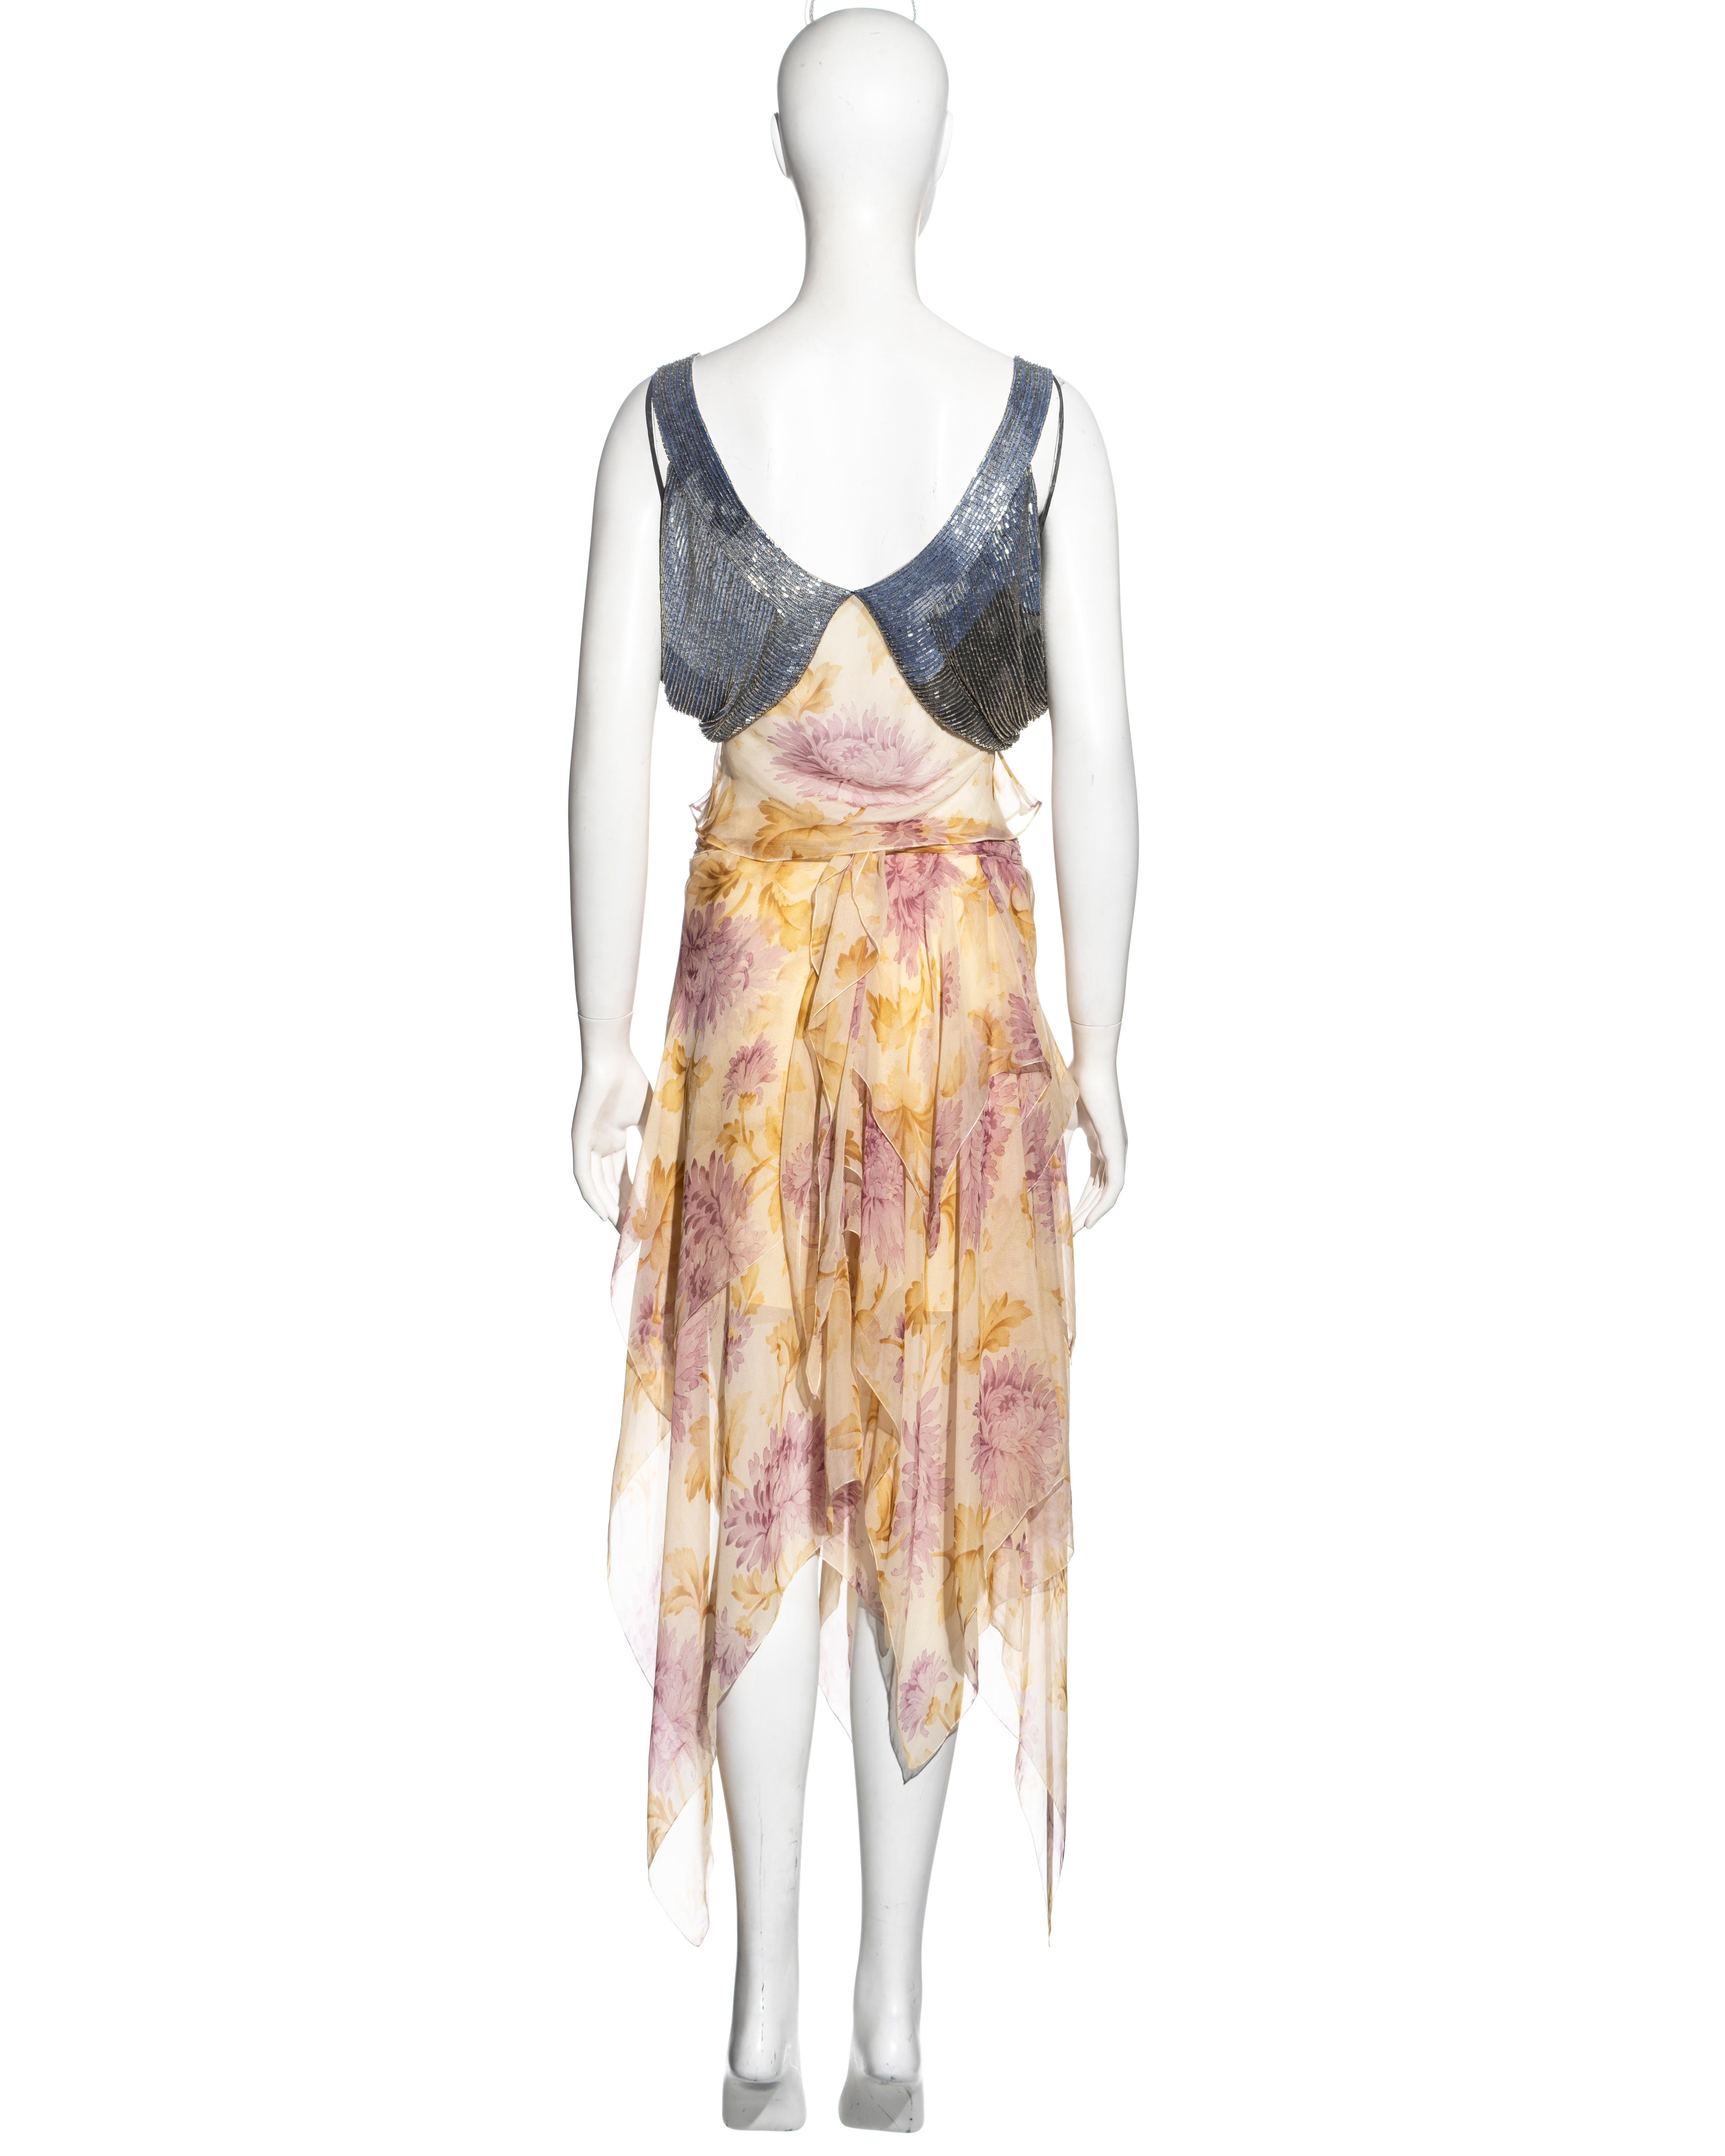 Christian Dior by John Galliano floral silk chiffon top and skirt set, fw 2001 For Sale 3